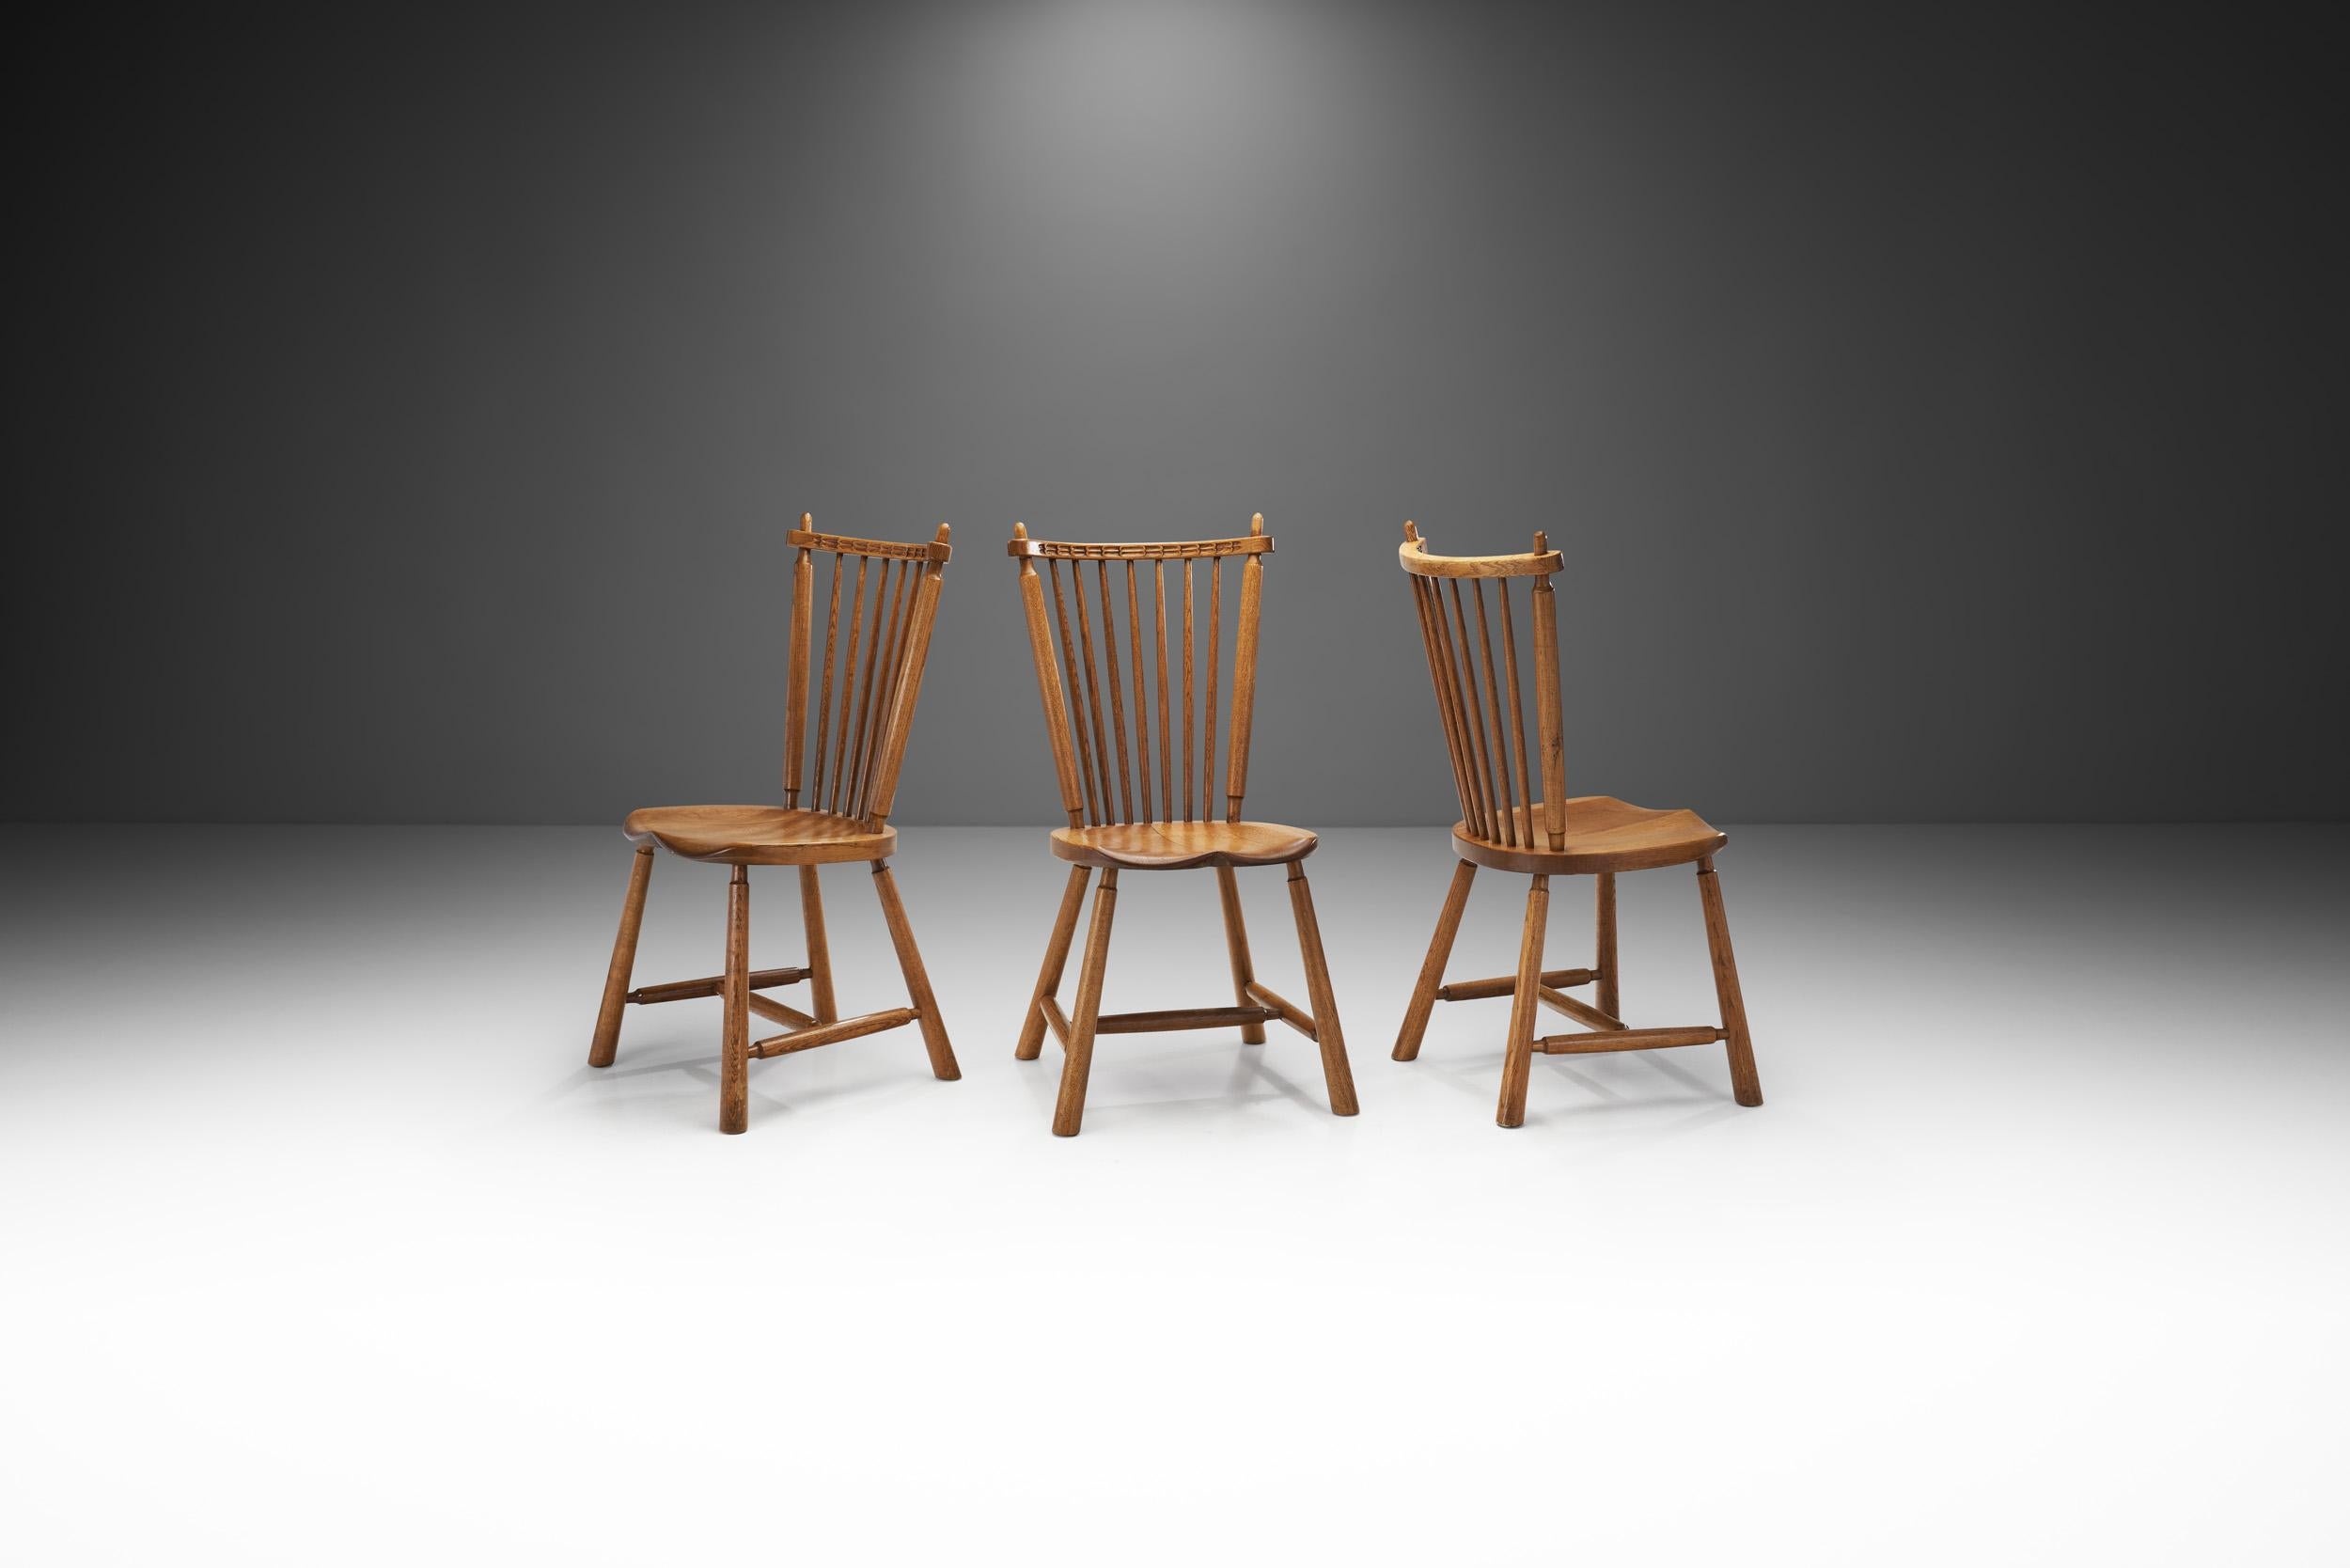 The Dutch manufacturer, De Ster Gelderland from the centre-east of the Netherlands produced many of the most well-known Dutch chairs of the mid-20th century. Their expertise in woodworking is evident in this trio of chairs, with precisely sculpted